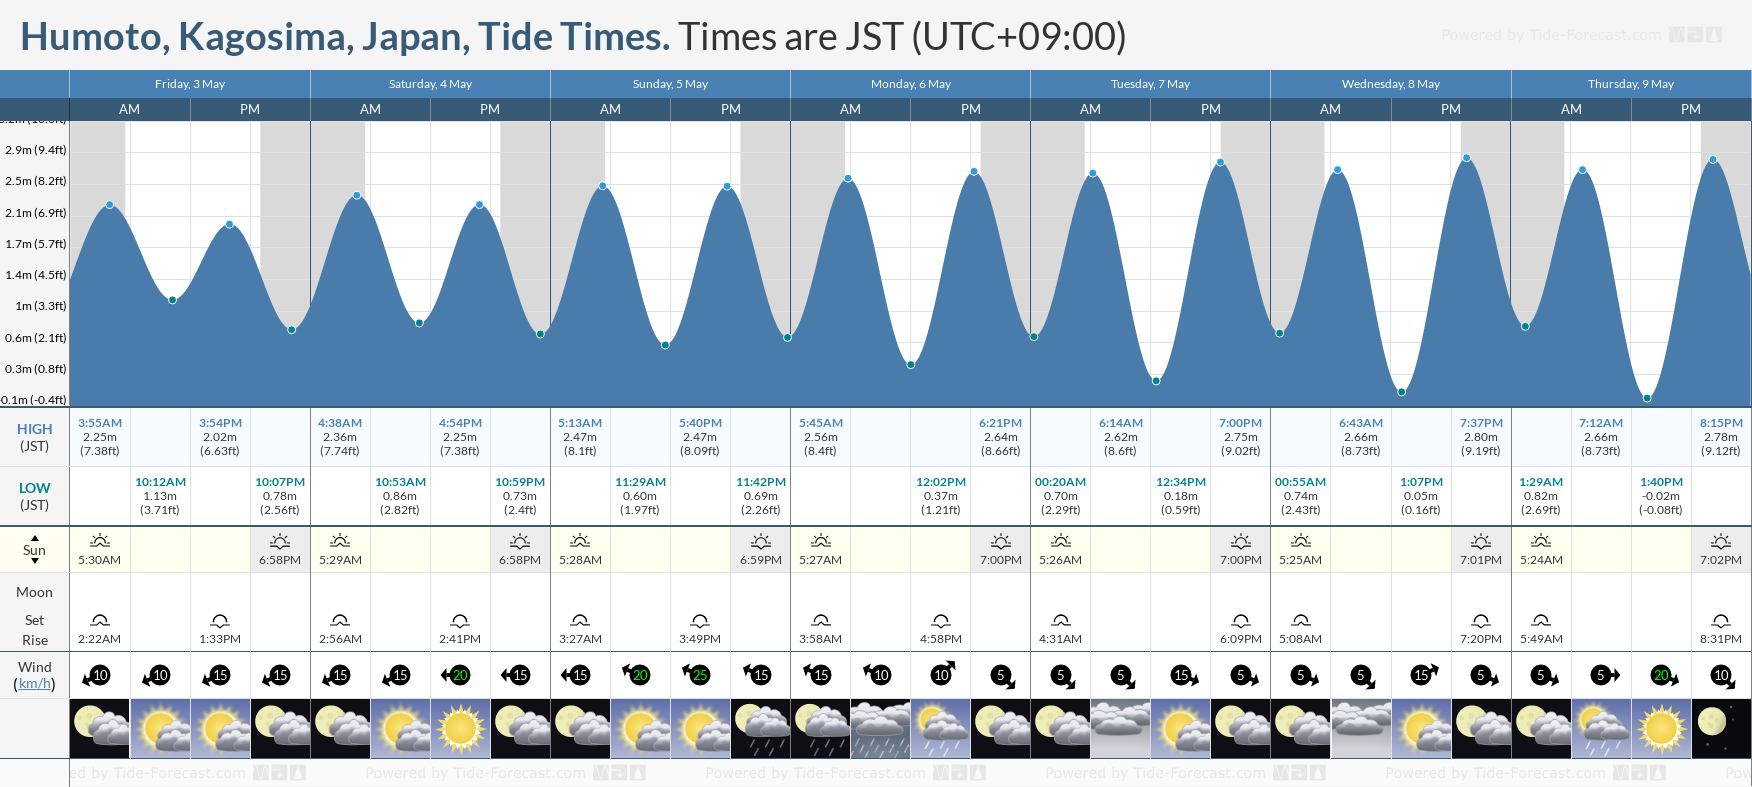 Humoto, Kagosima, Japan Tide Chart including high and low tide tide times for the next 7 days